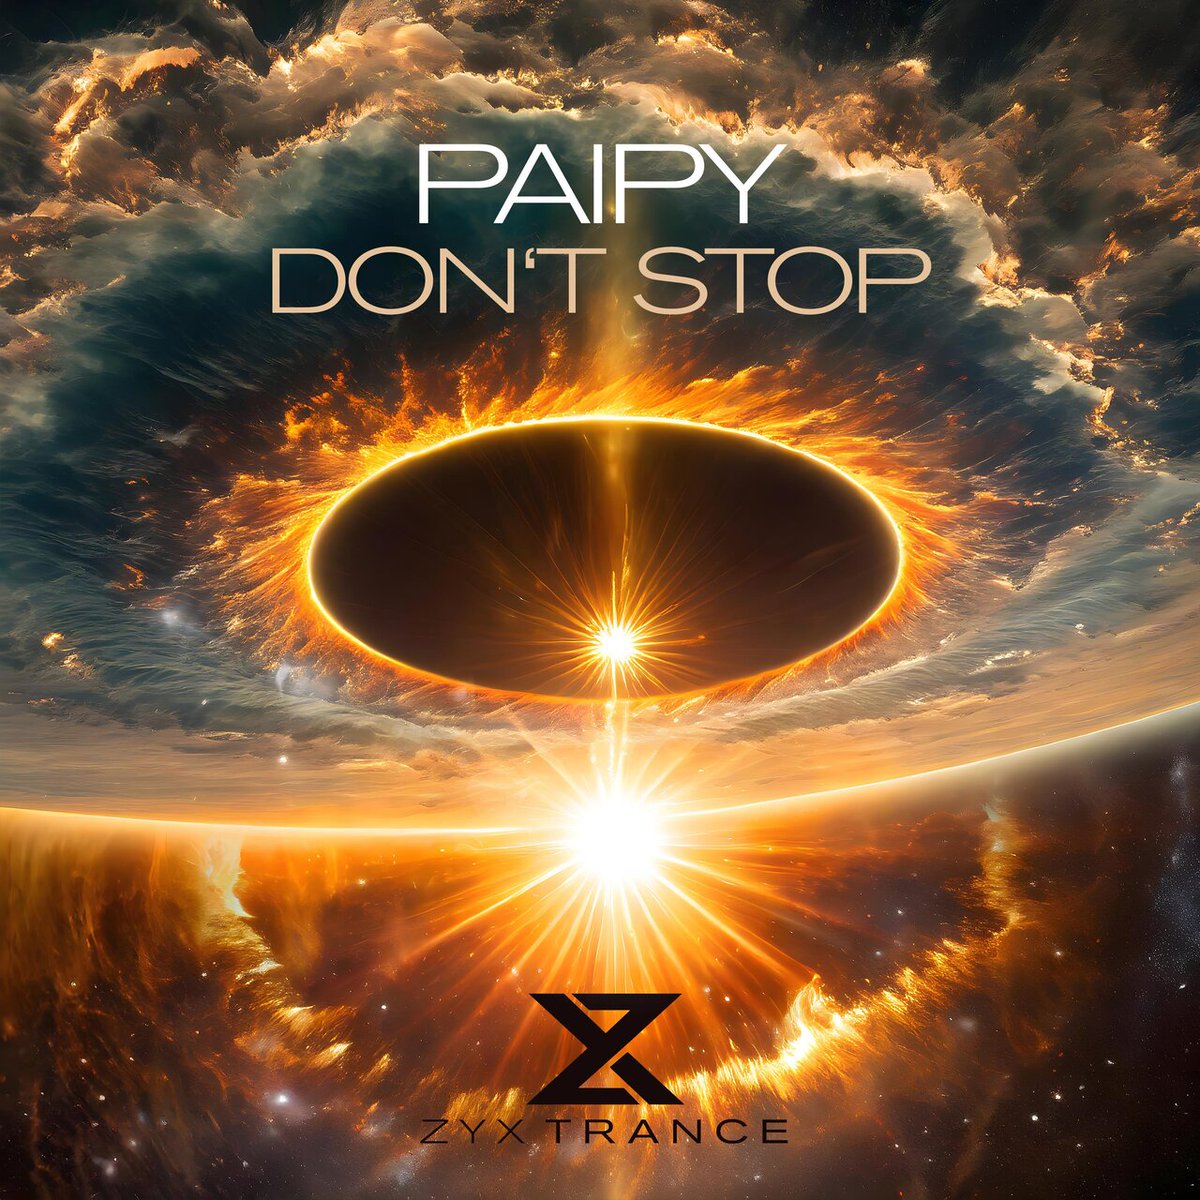 #NowPlaying #SpiritualTrance185
@PlayTranceRadio🔊playtrance.com 22. @paipyofficial - Don't Stop [@Official_ZYX] #NewMusic #Trance #TranceFamily